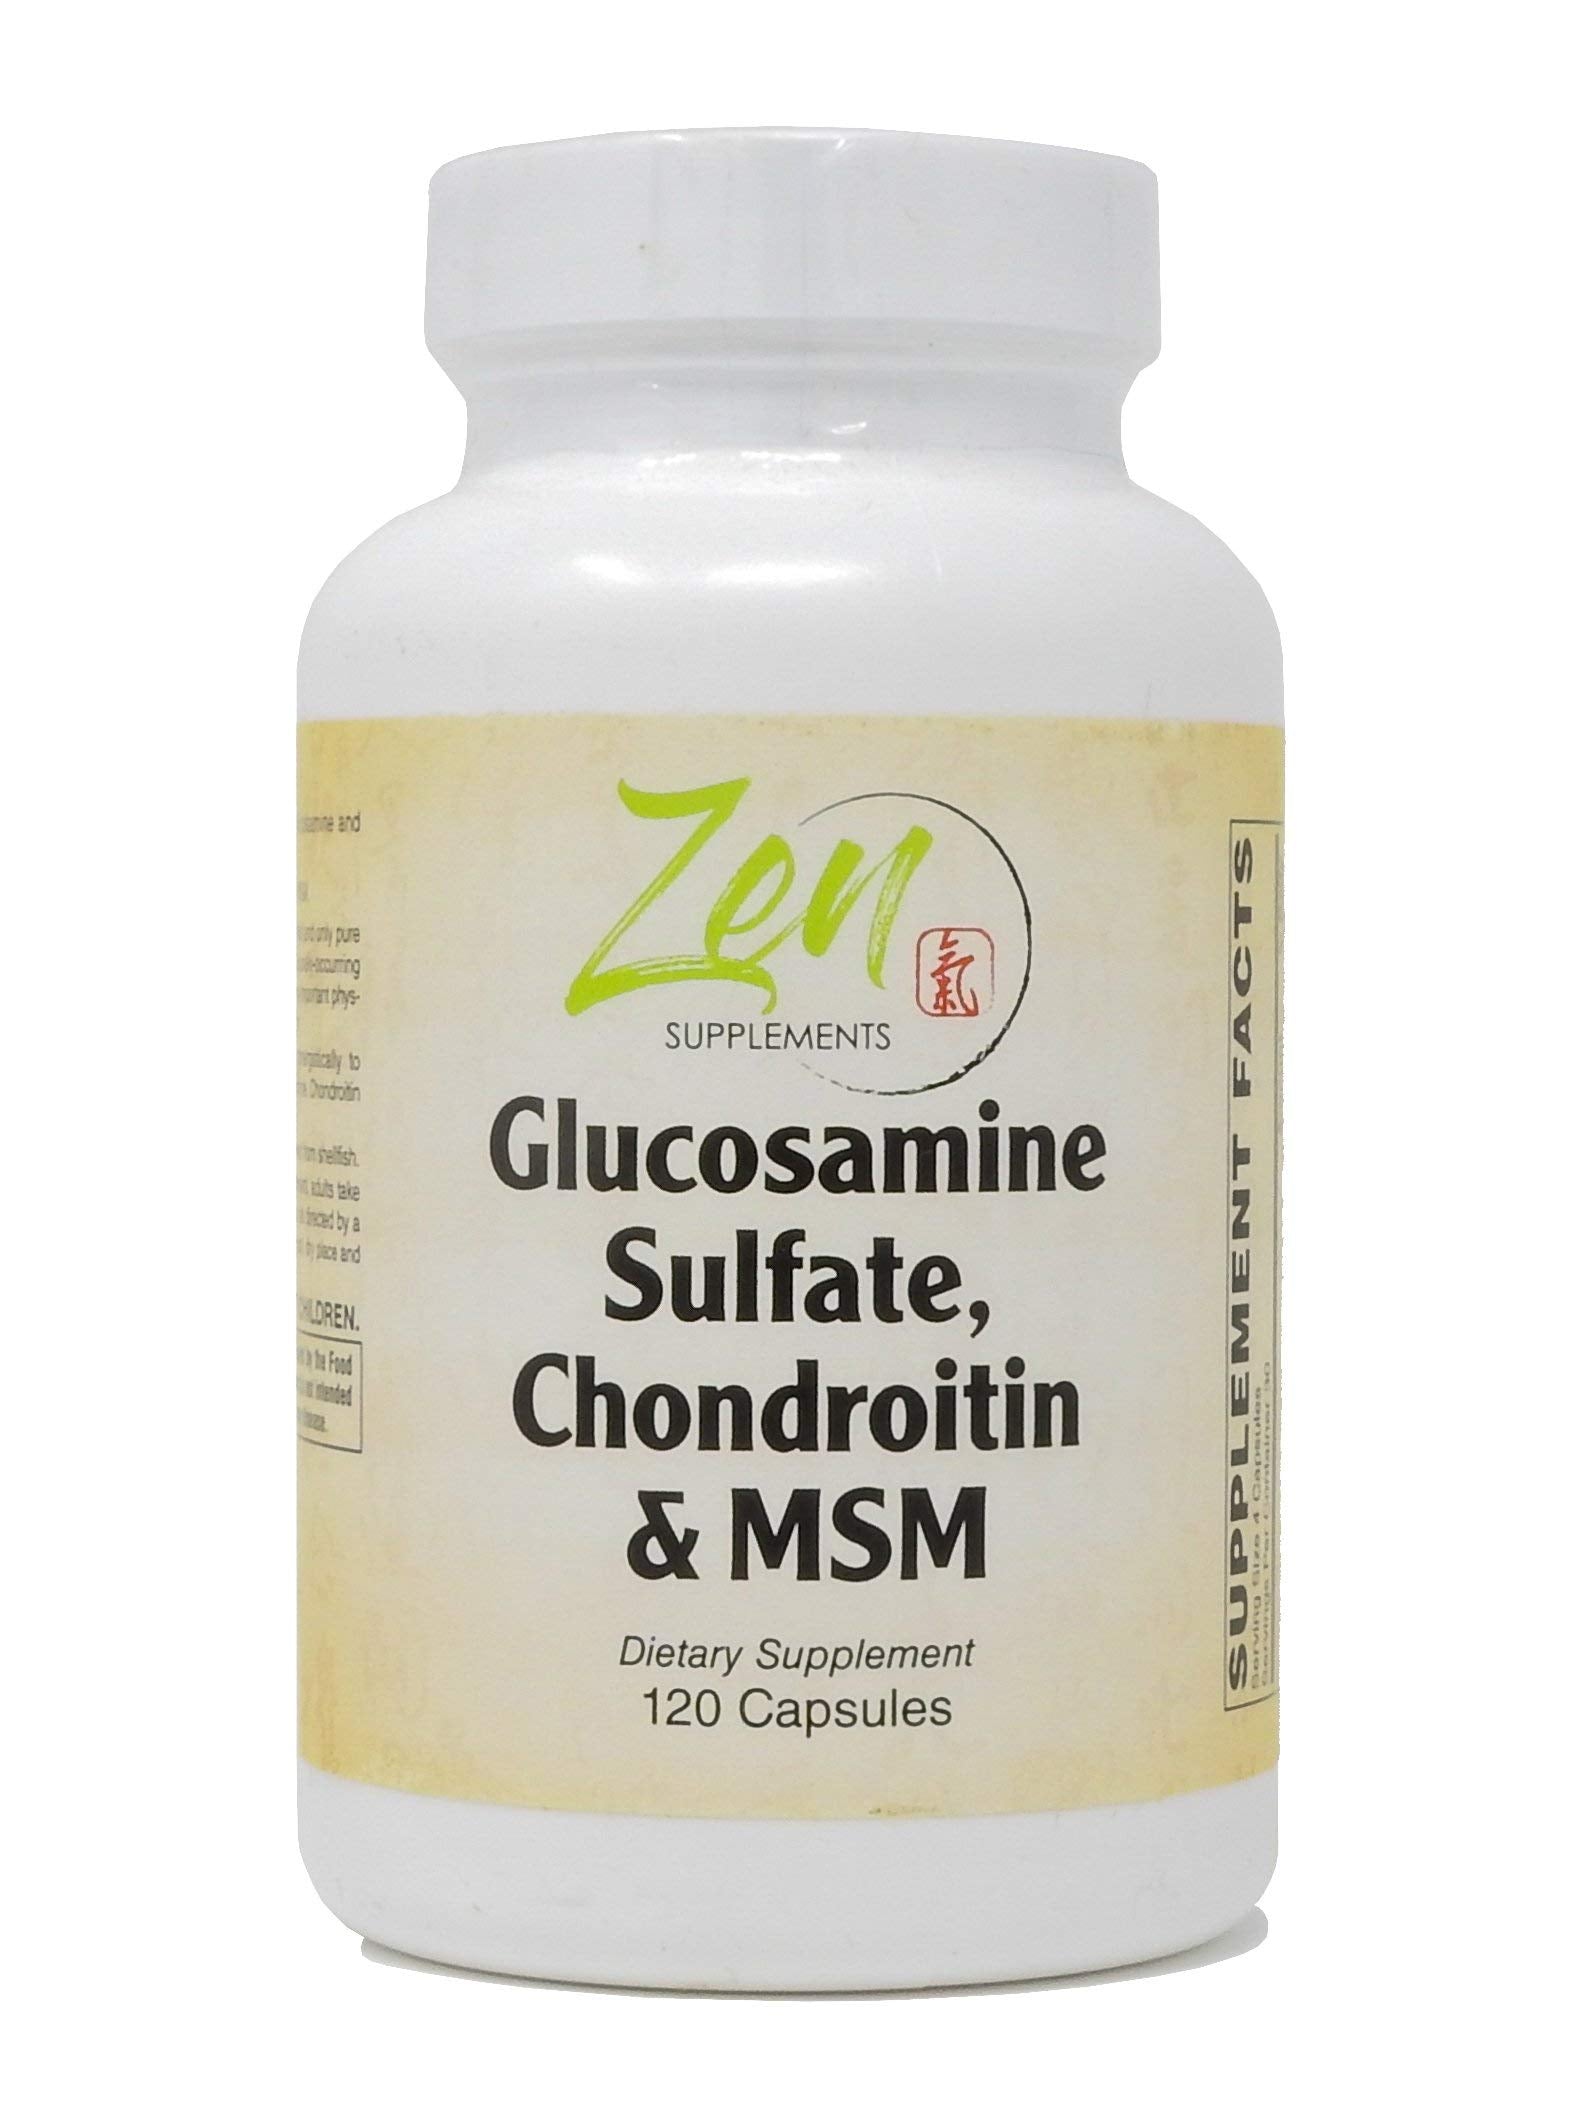 Zen Supplements - Glucosamine Sulfate, Chondroitin & MSM - Supports Healthy Joint Structure, Mobility Function & Comfort 120-Caps